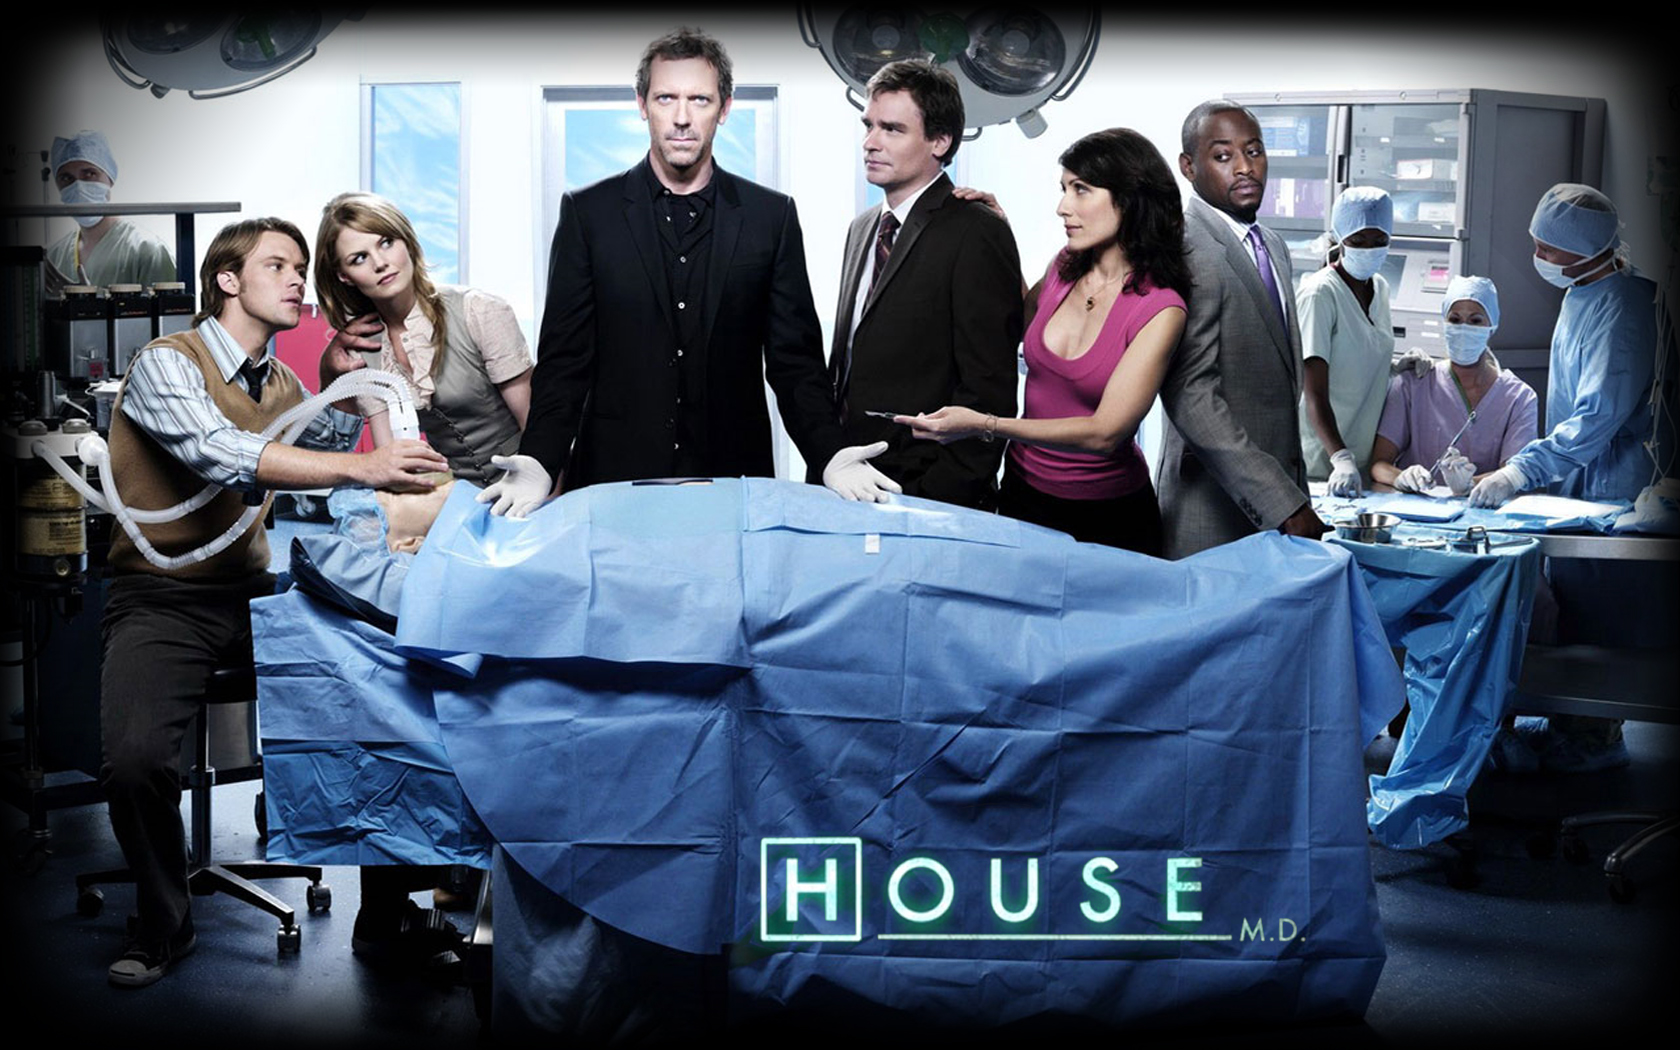 house_md_wallpaper_by_outragepaja.jpg